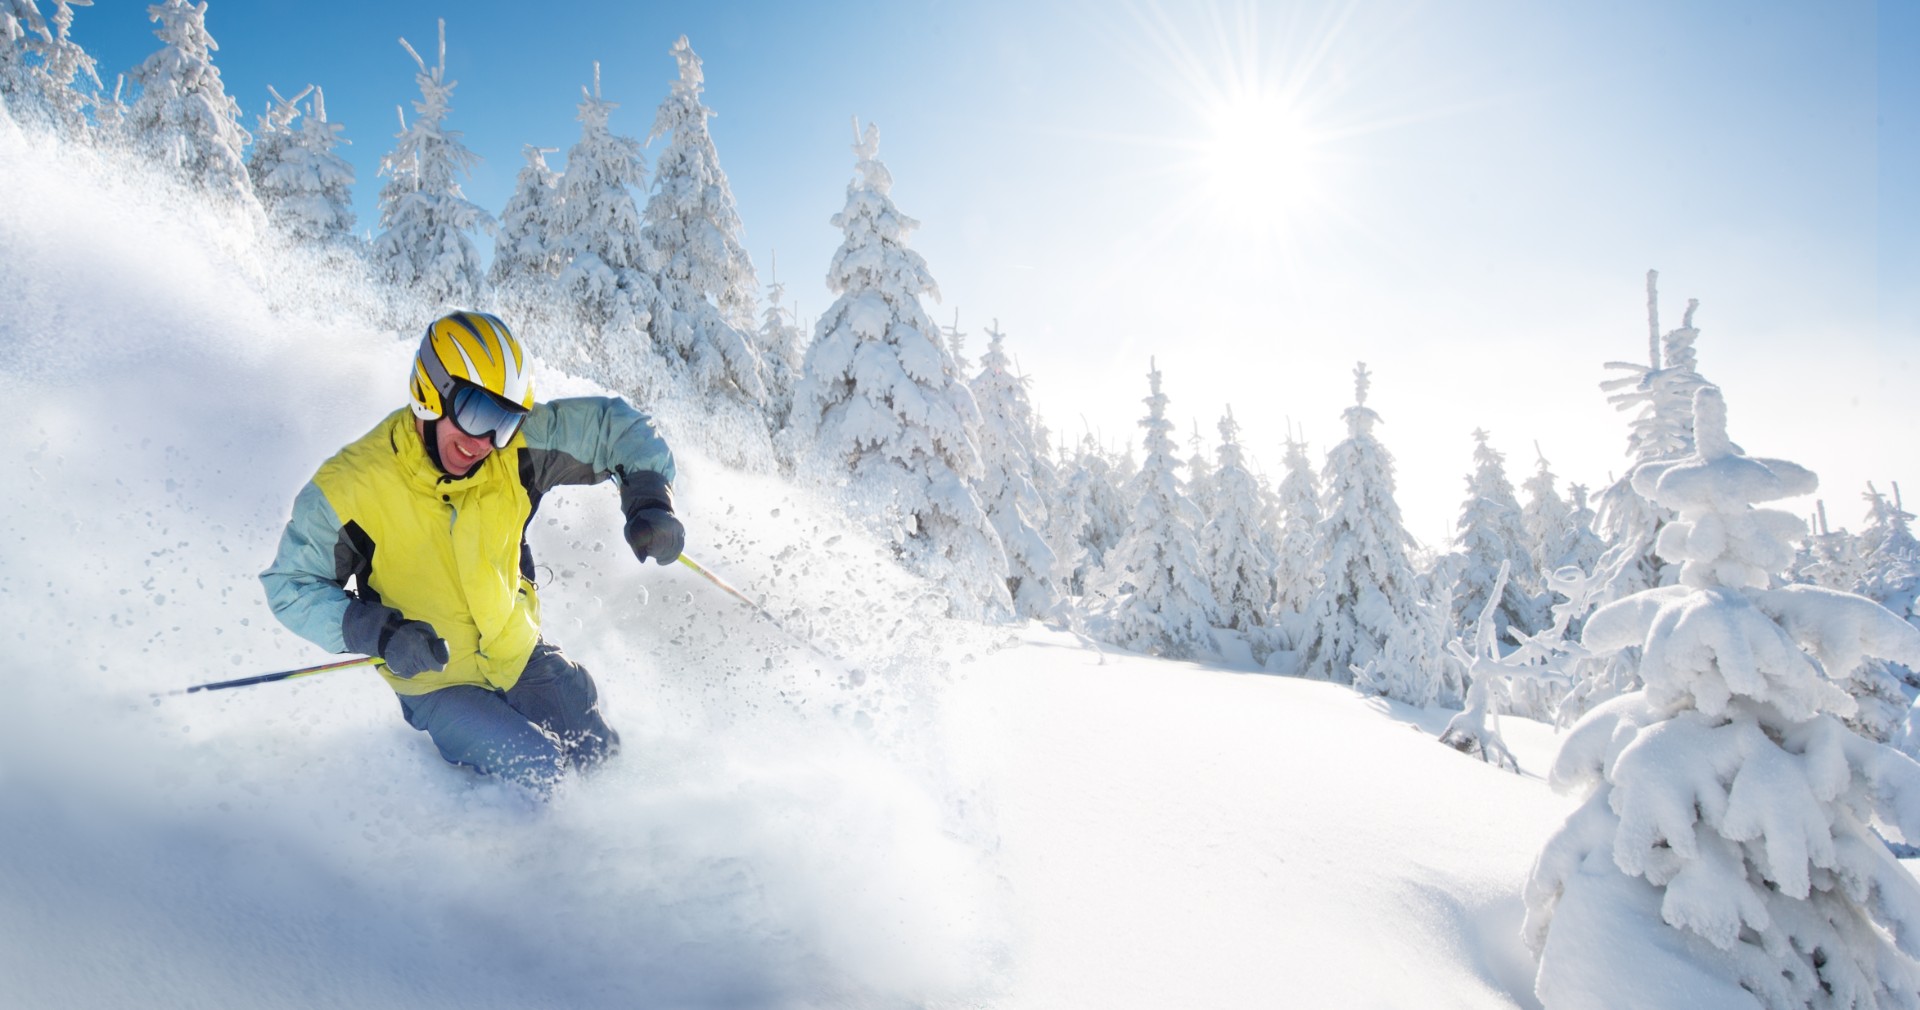 Top 6 Safety Tips For Beginner Skiers At Destination Resorts